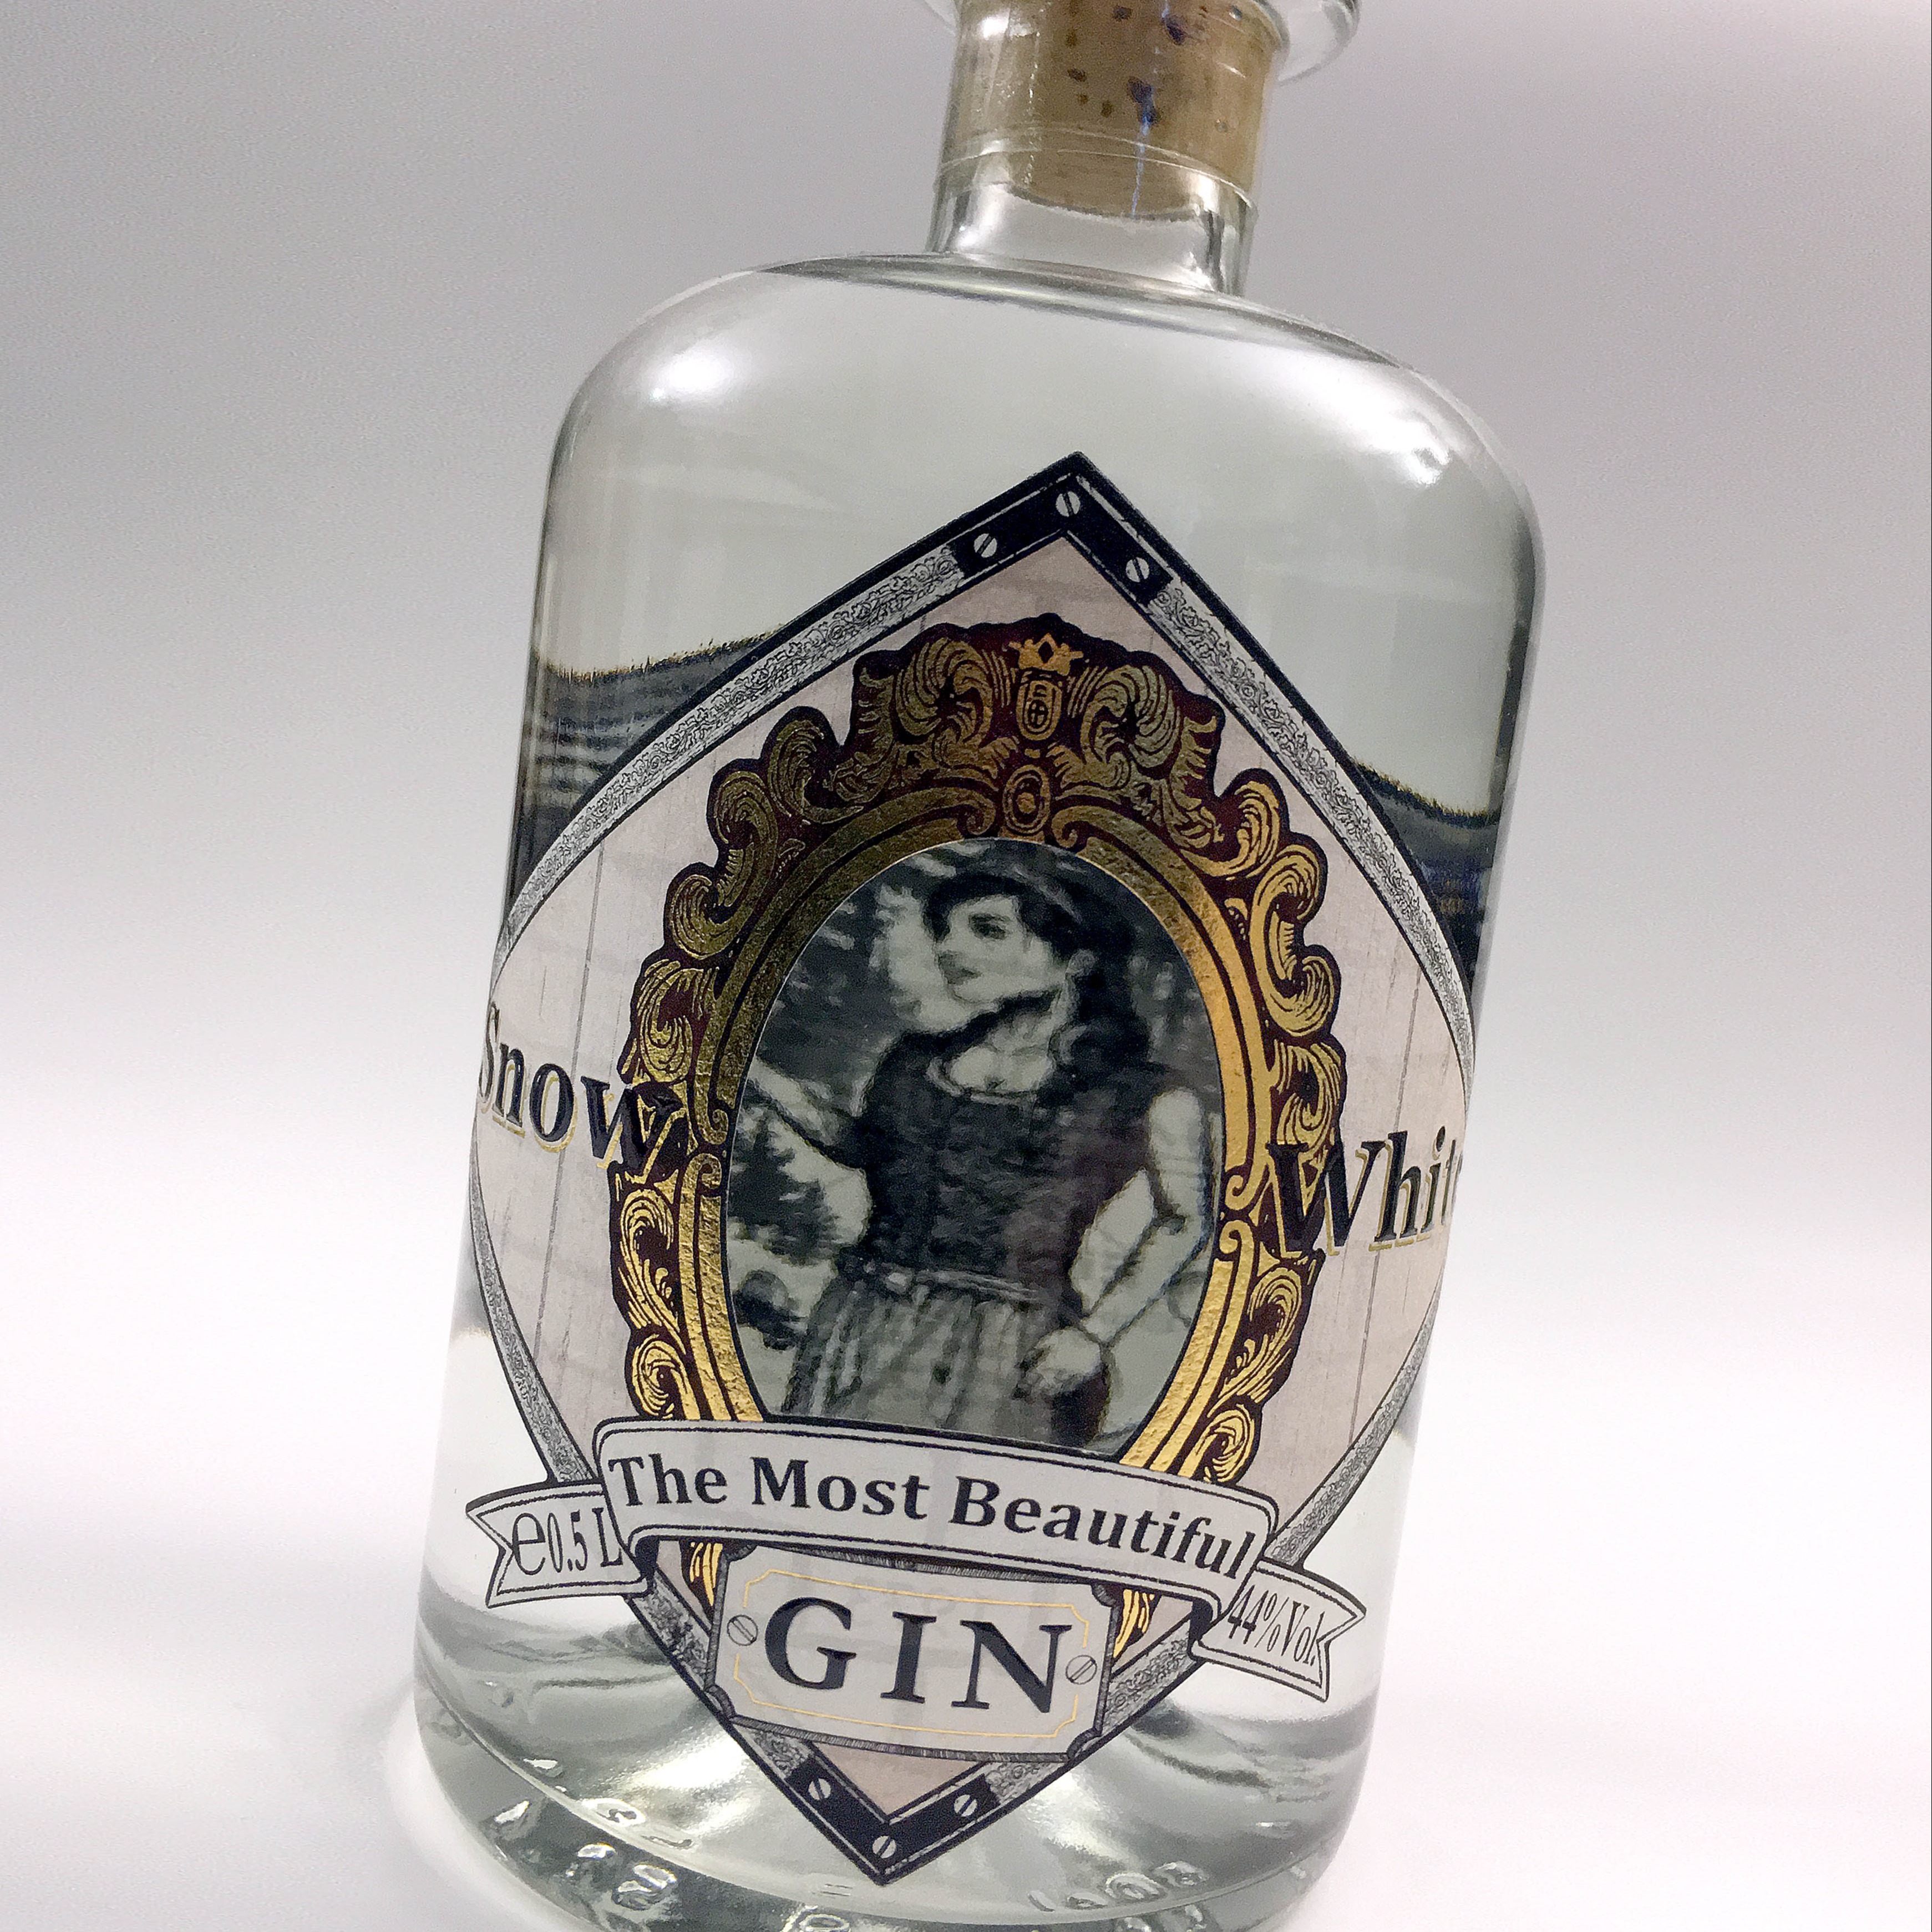 Snow White GIN_front view